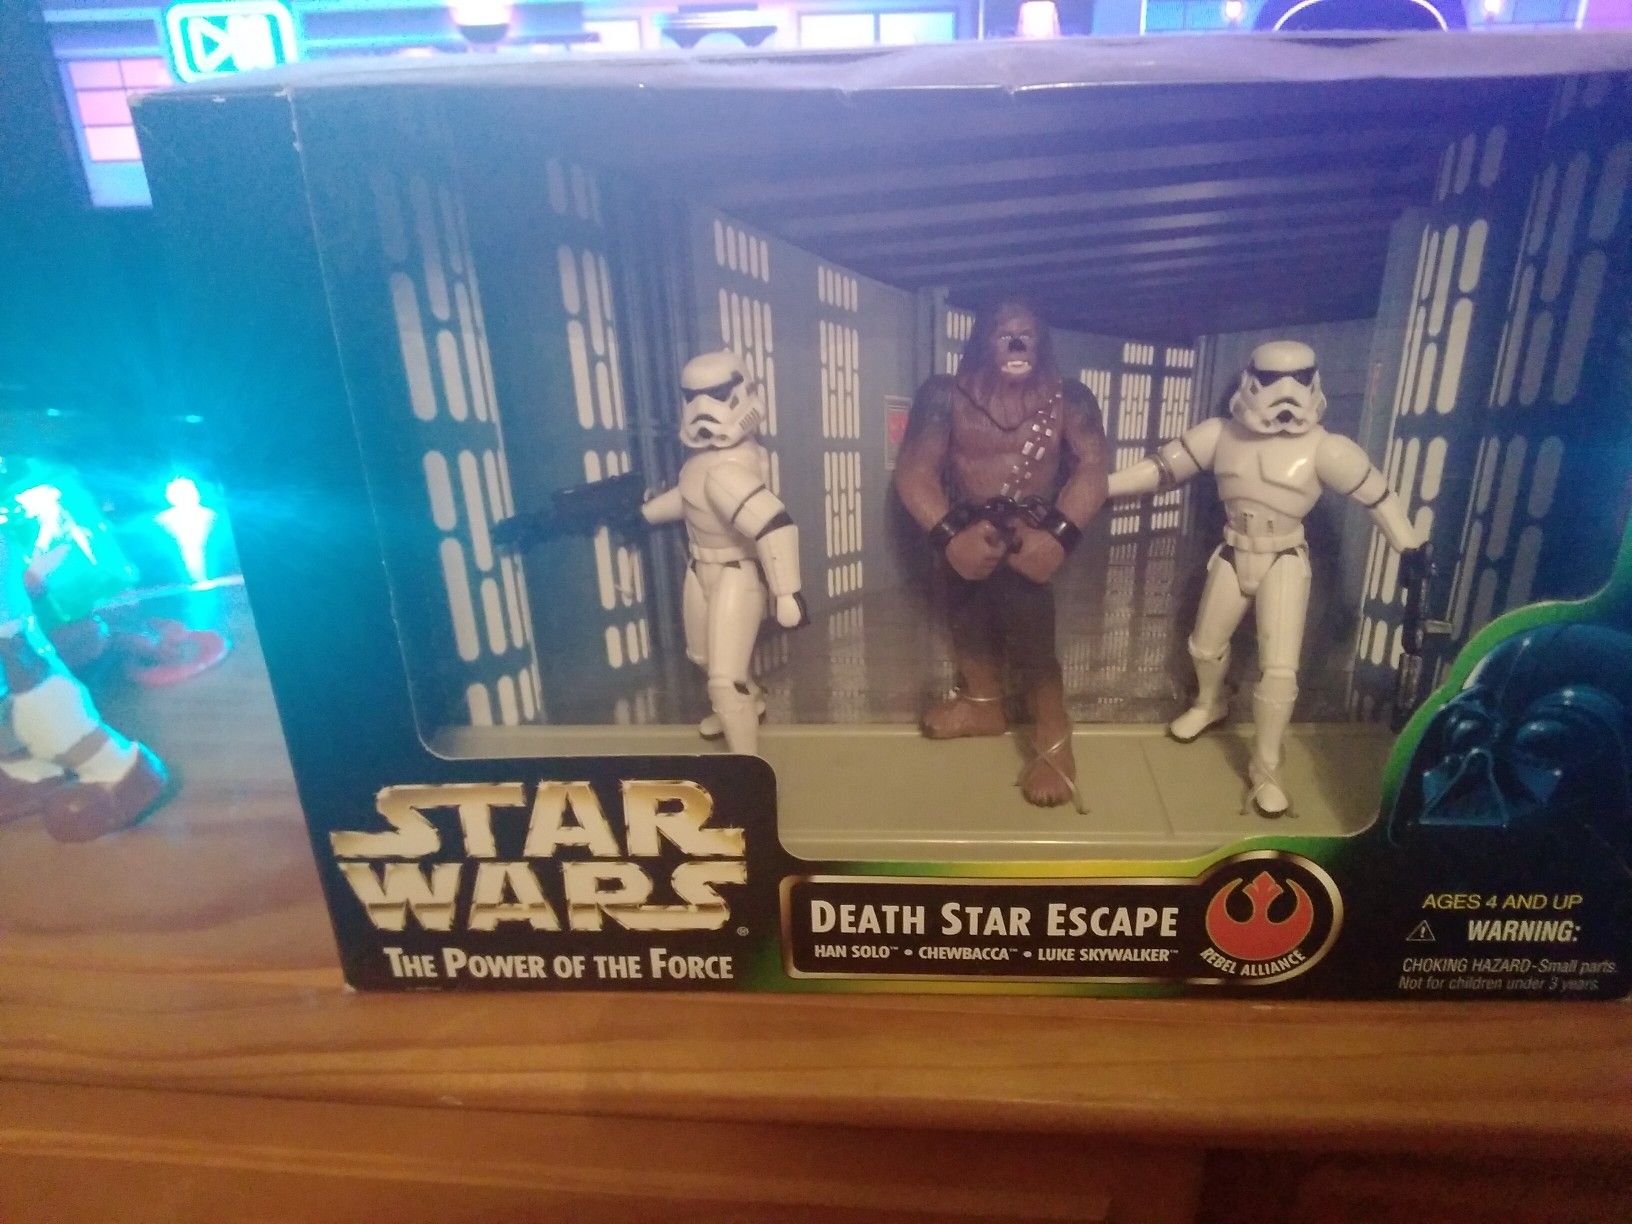 Star wars death star escape with action figures. $25 obo